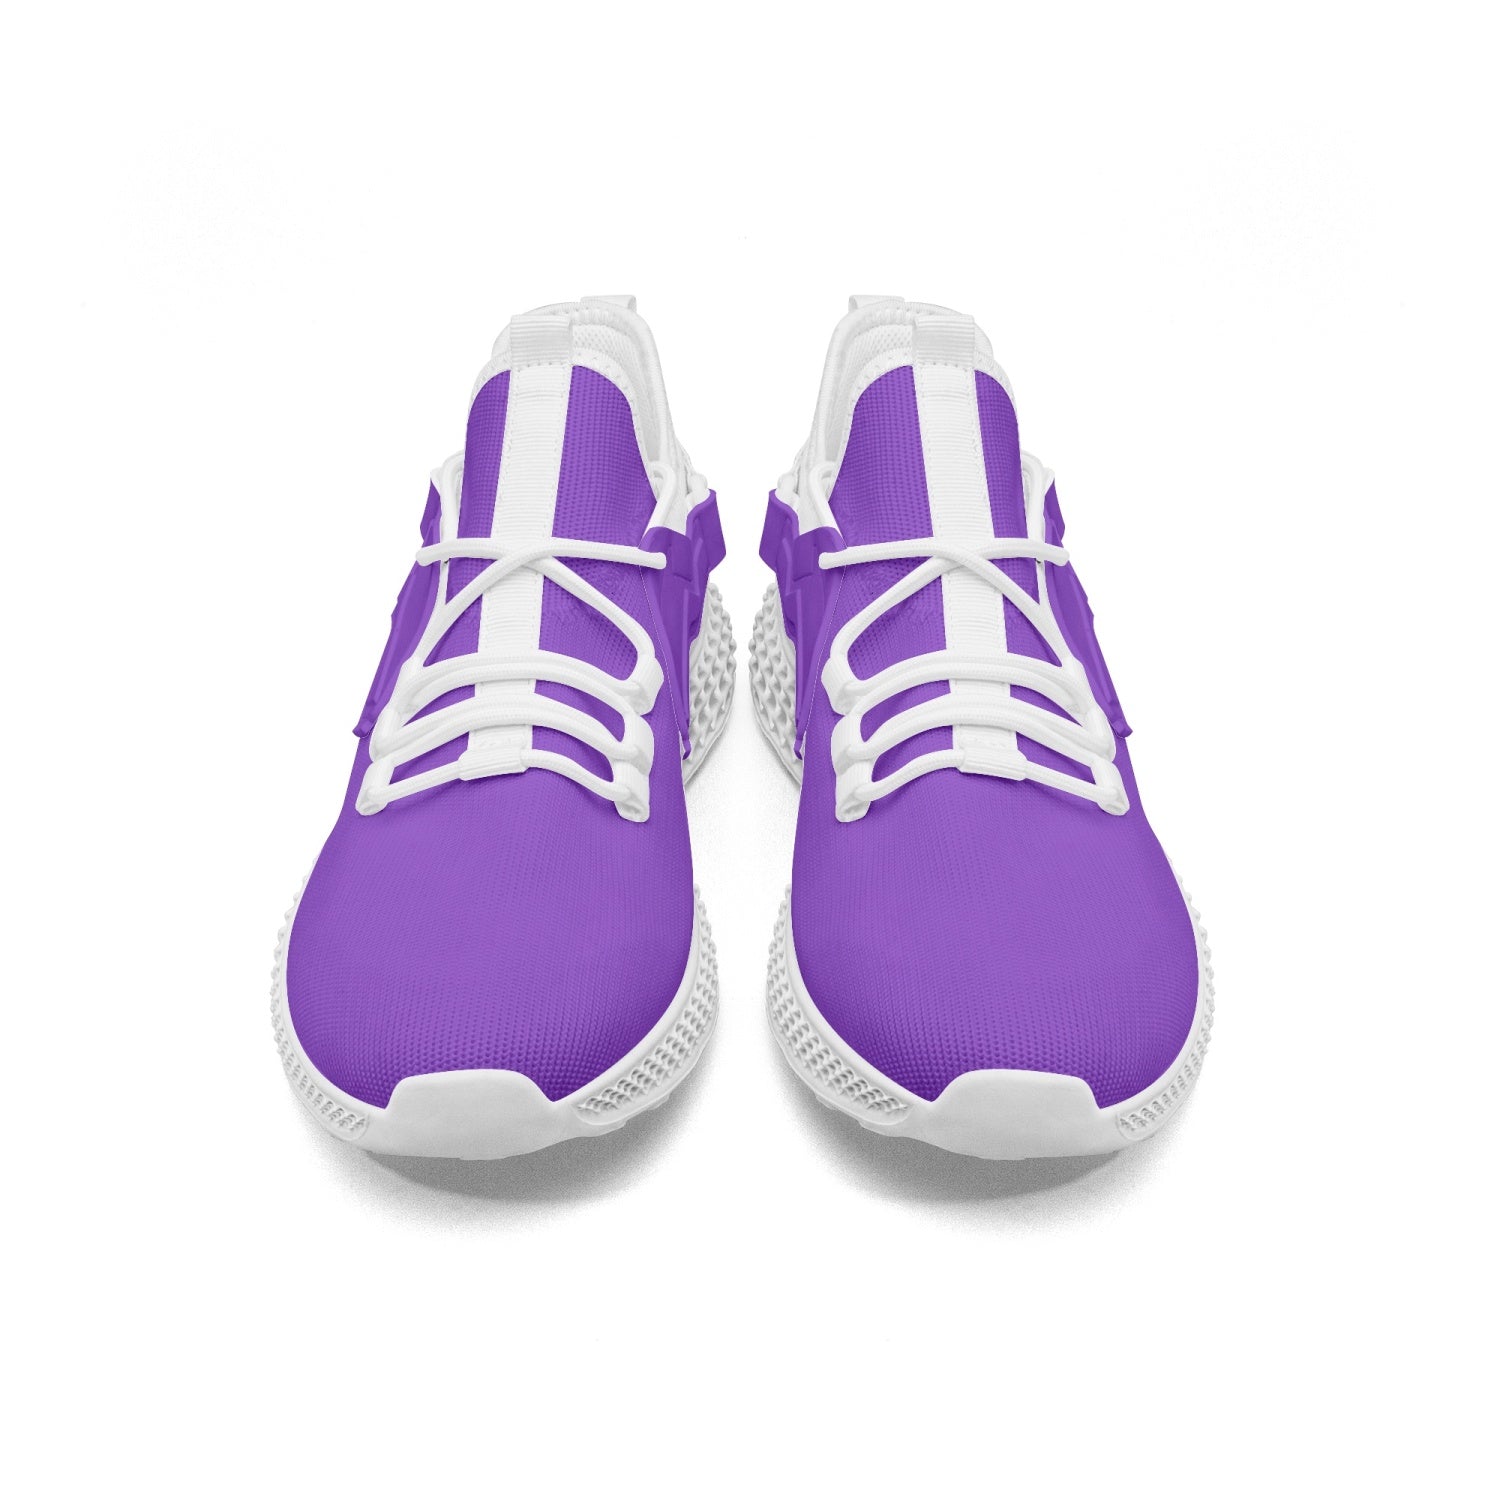 Unisex Net Style Mesh Knit Grape Purple Sneakers with Wing Shaped Patches